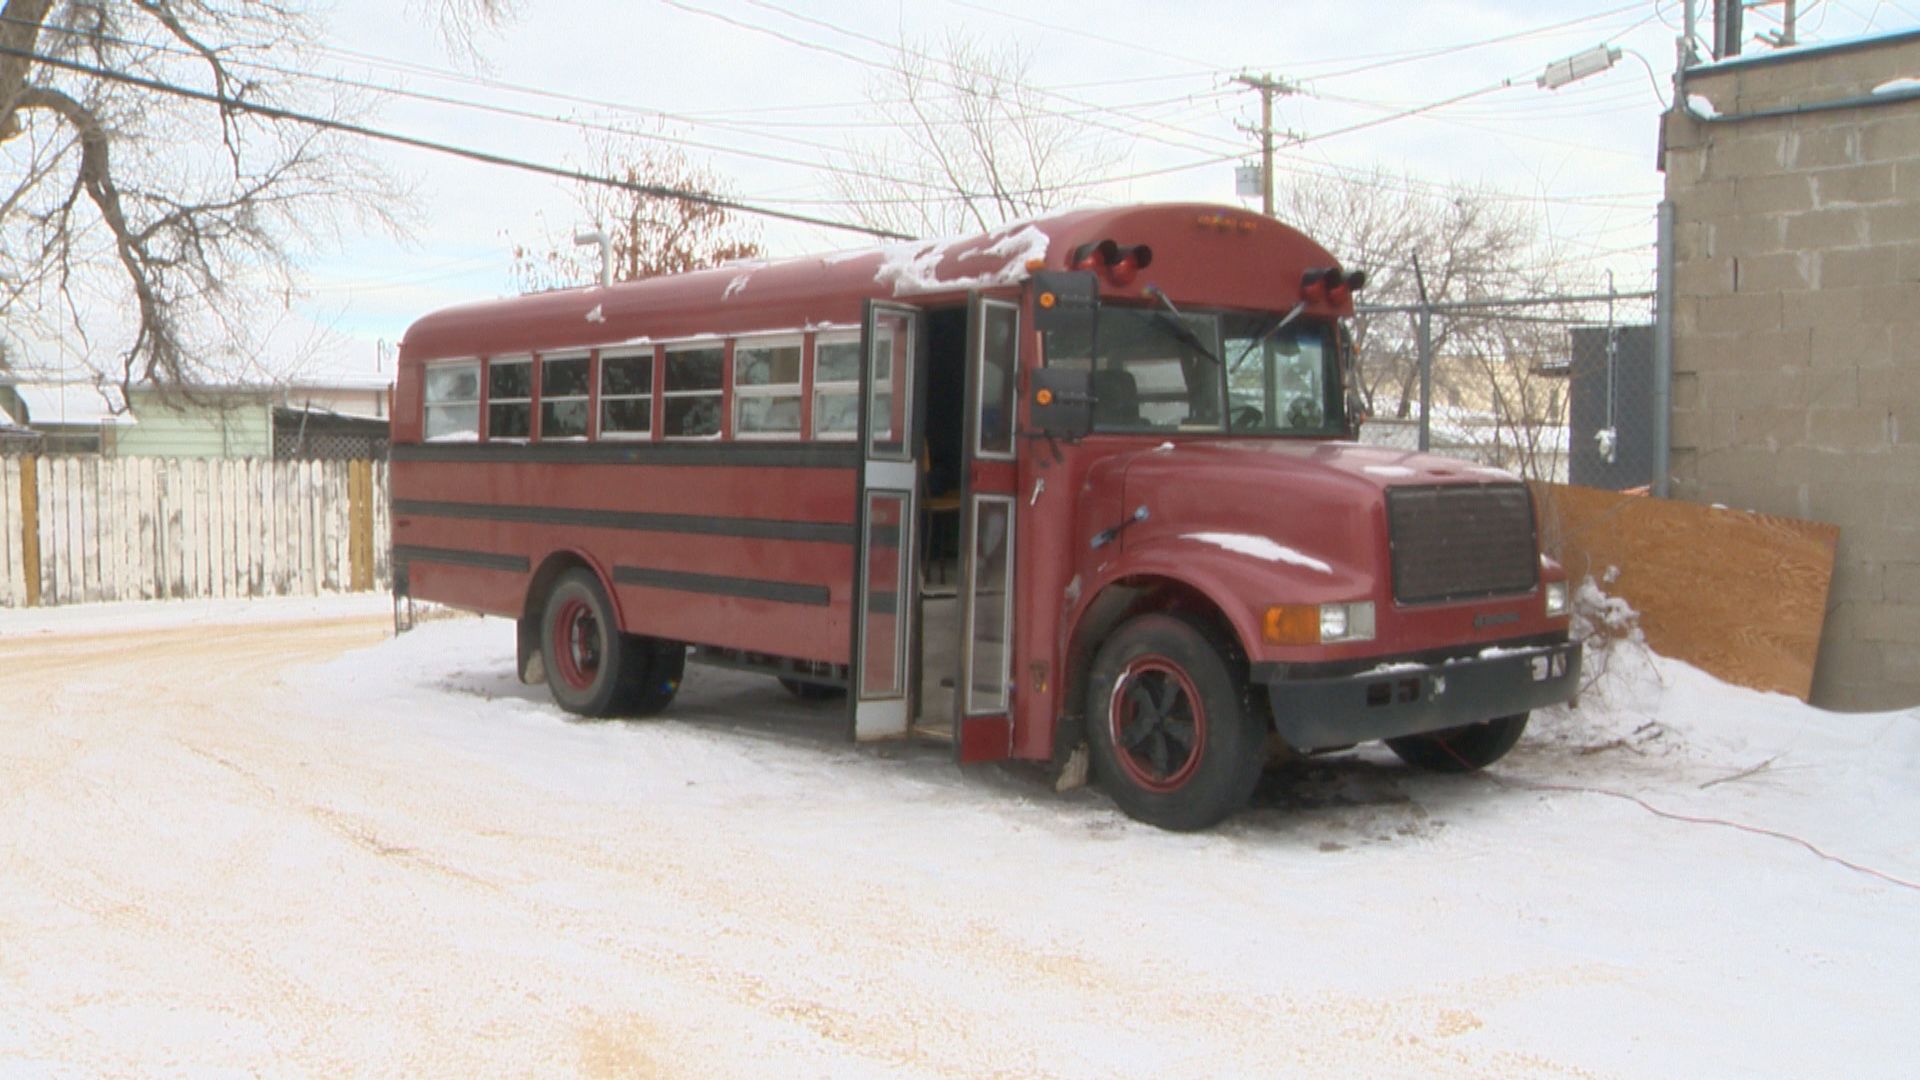 Saskatoon man provides warm up bus for residents in need